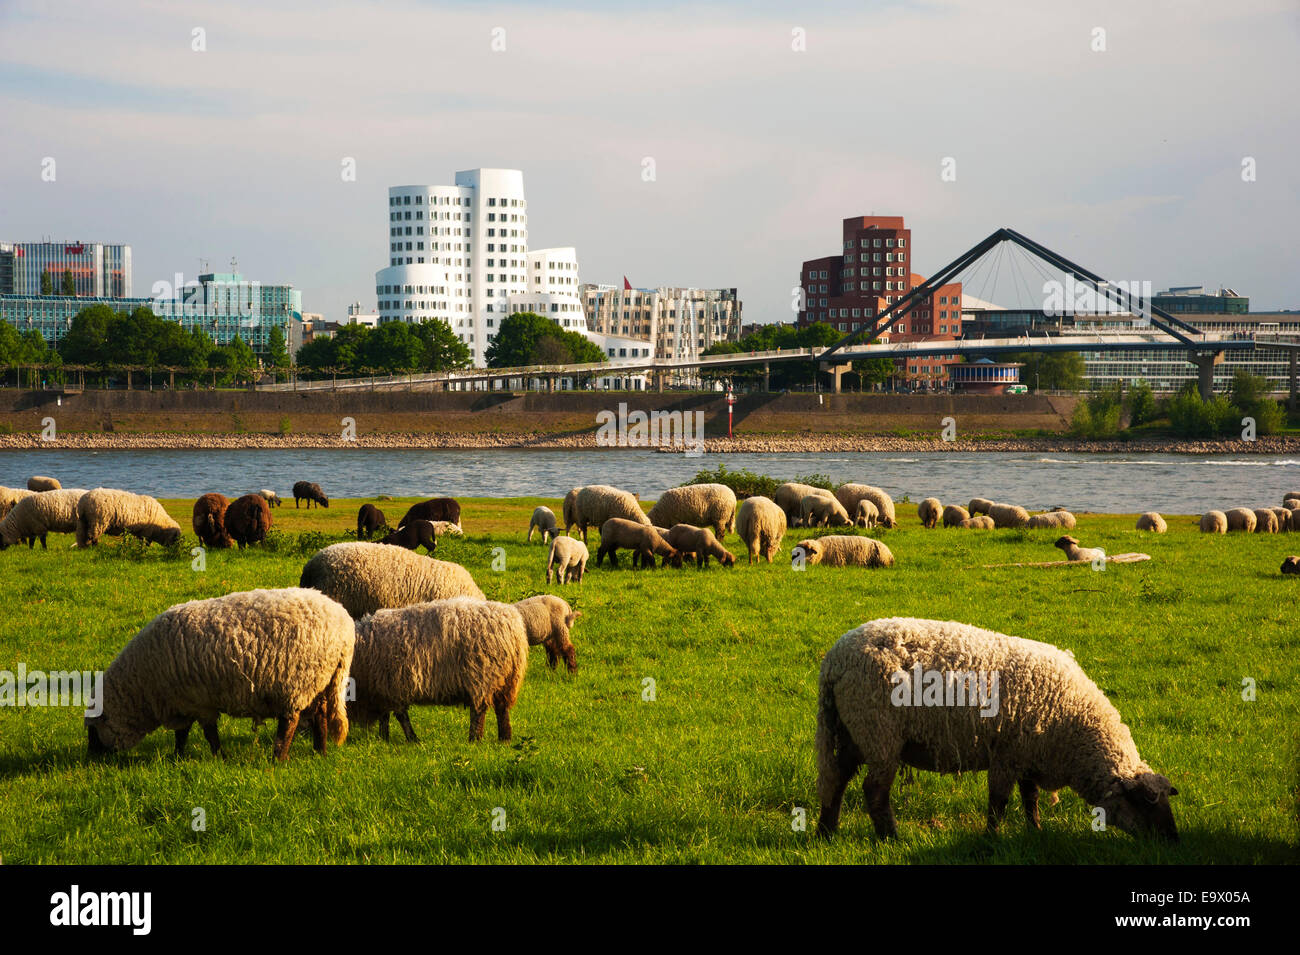 Sheep grazing in the green meadows on the banks of the Rhine river in Dusseldorf Oberkassel across from  Gehry buildings in the  Stock Photo